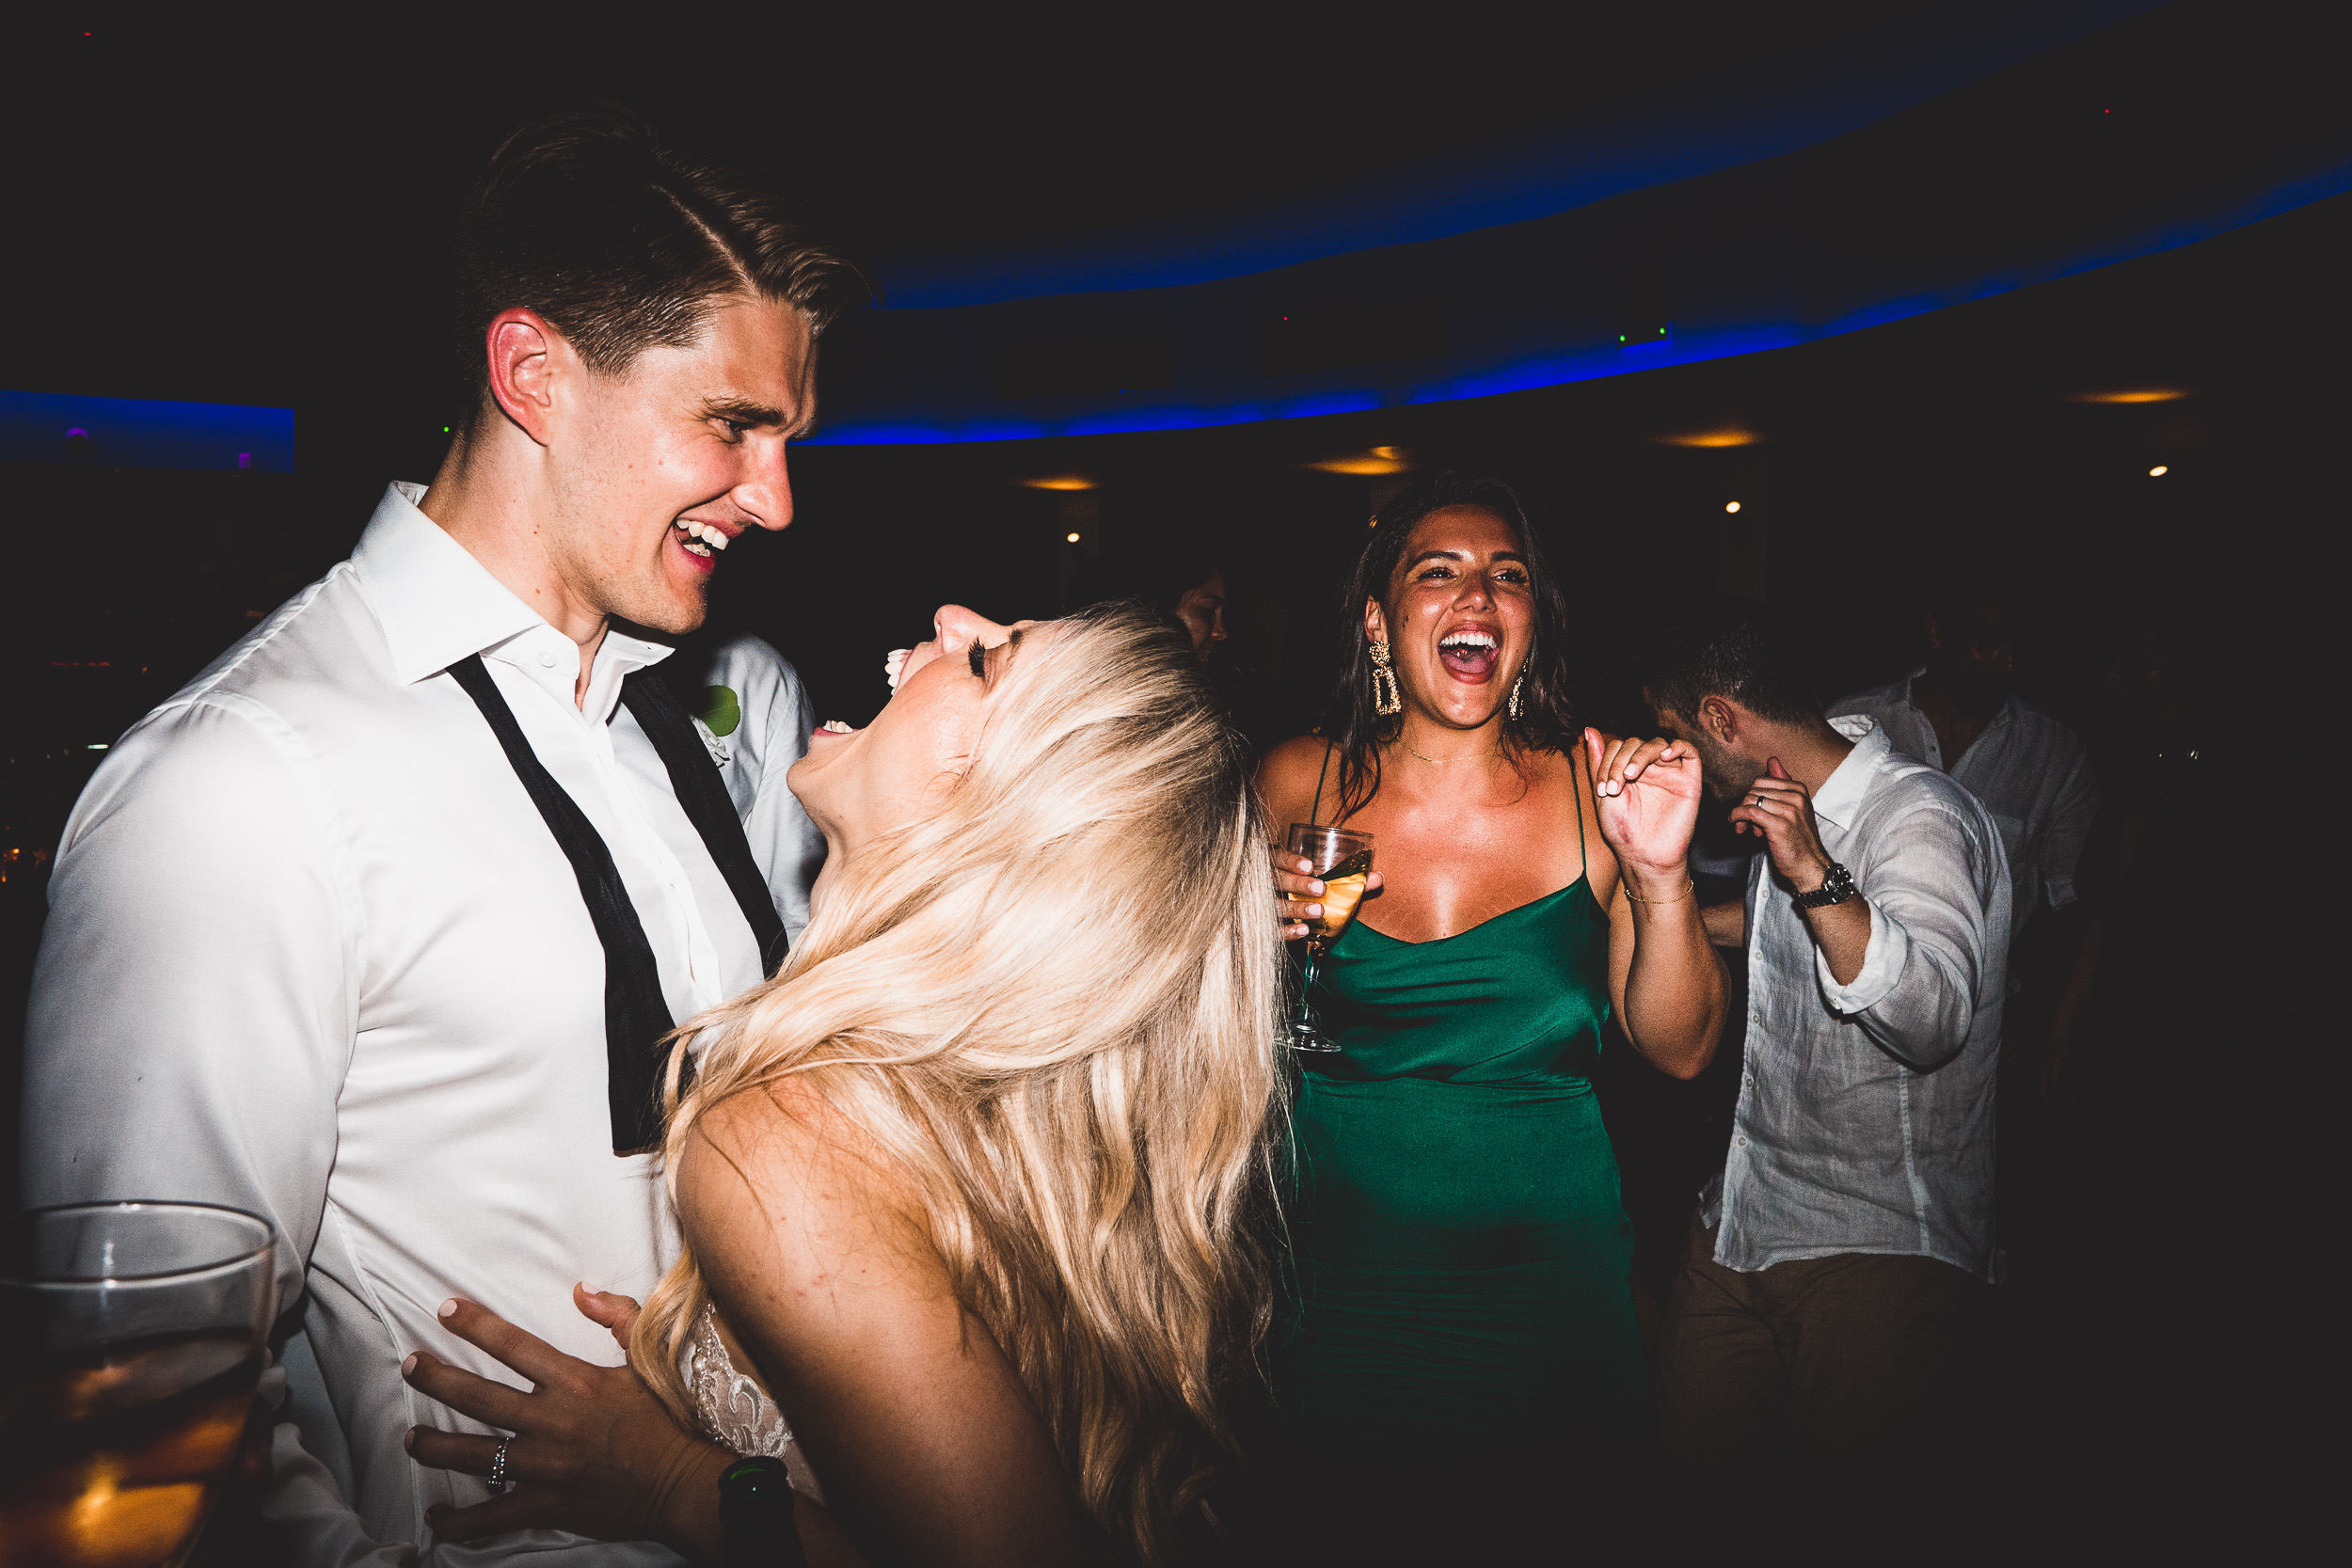 A groom dancing with the bride captured by the wedding photographer for a memorable wedding photo.